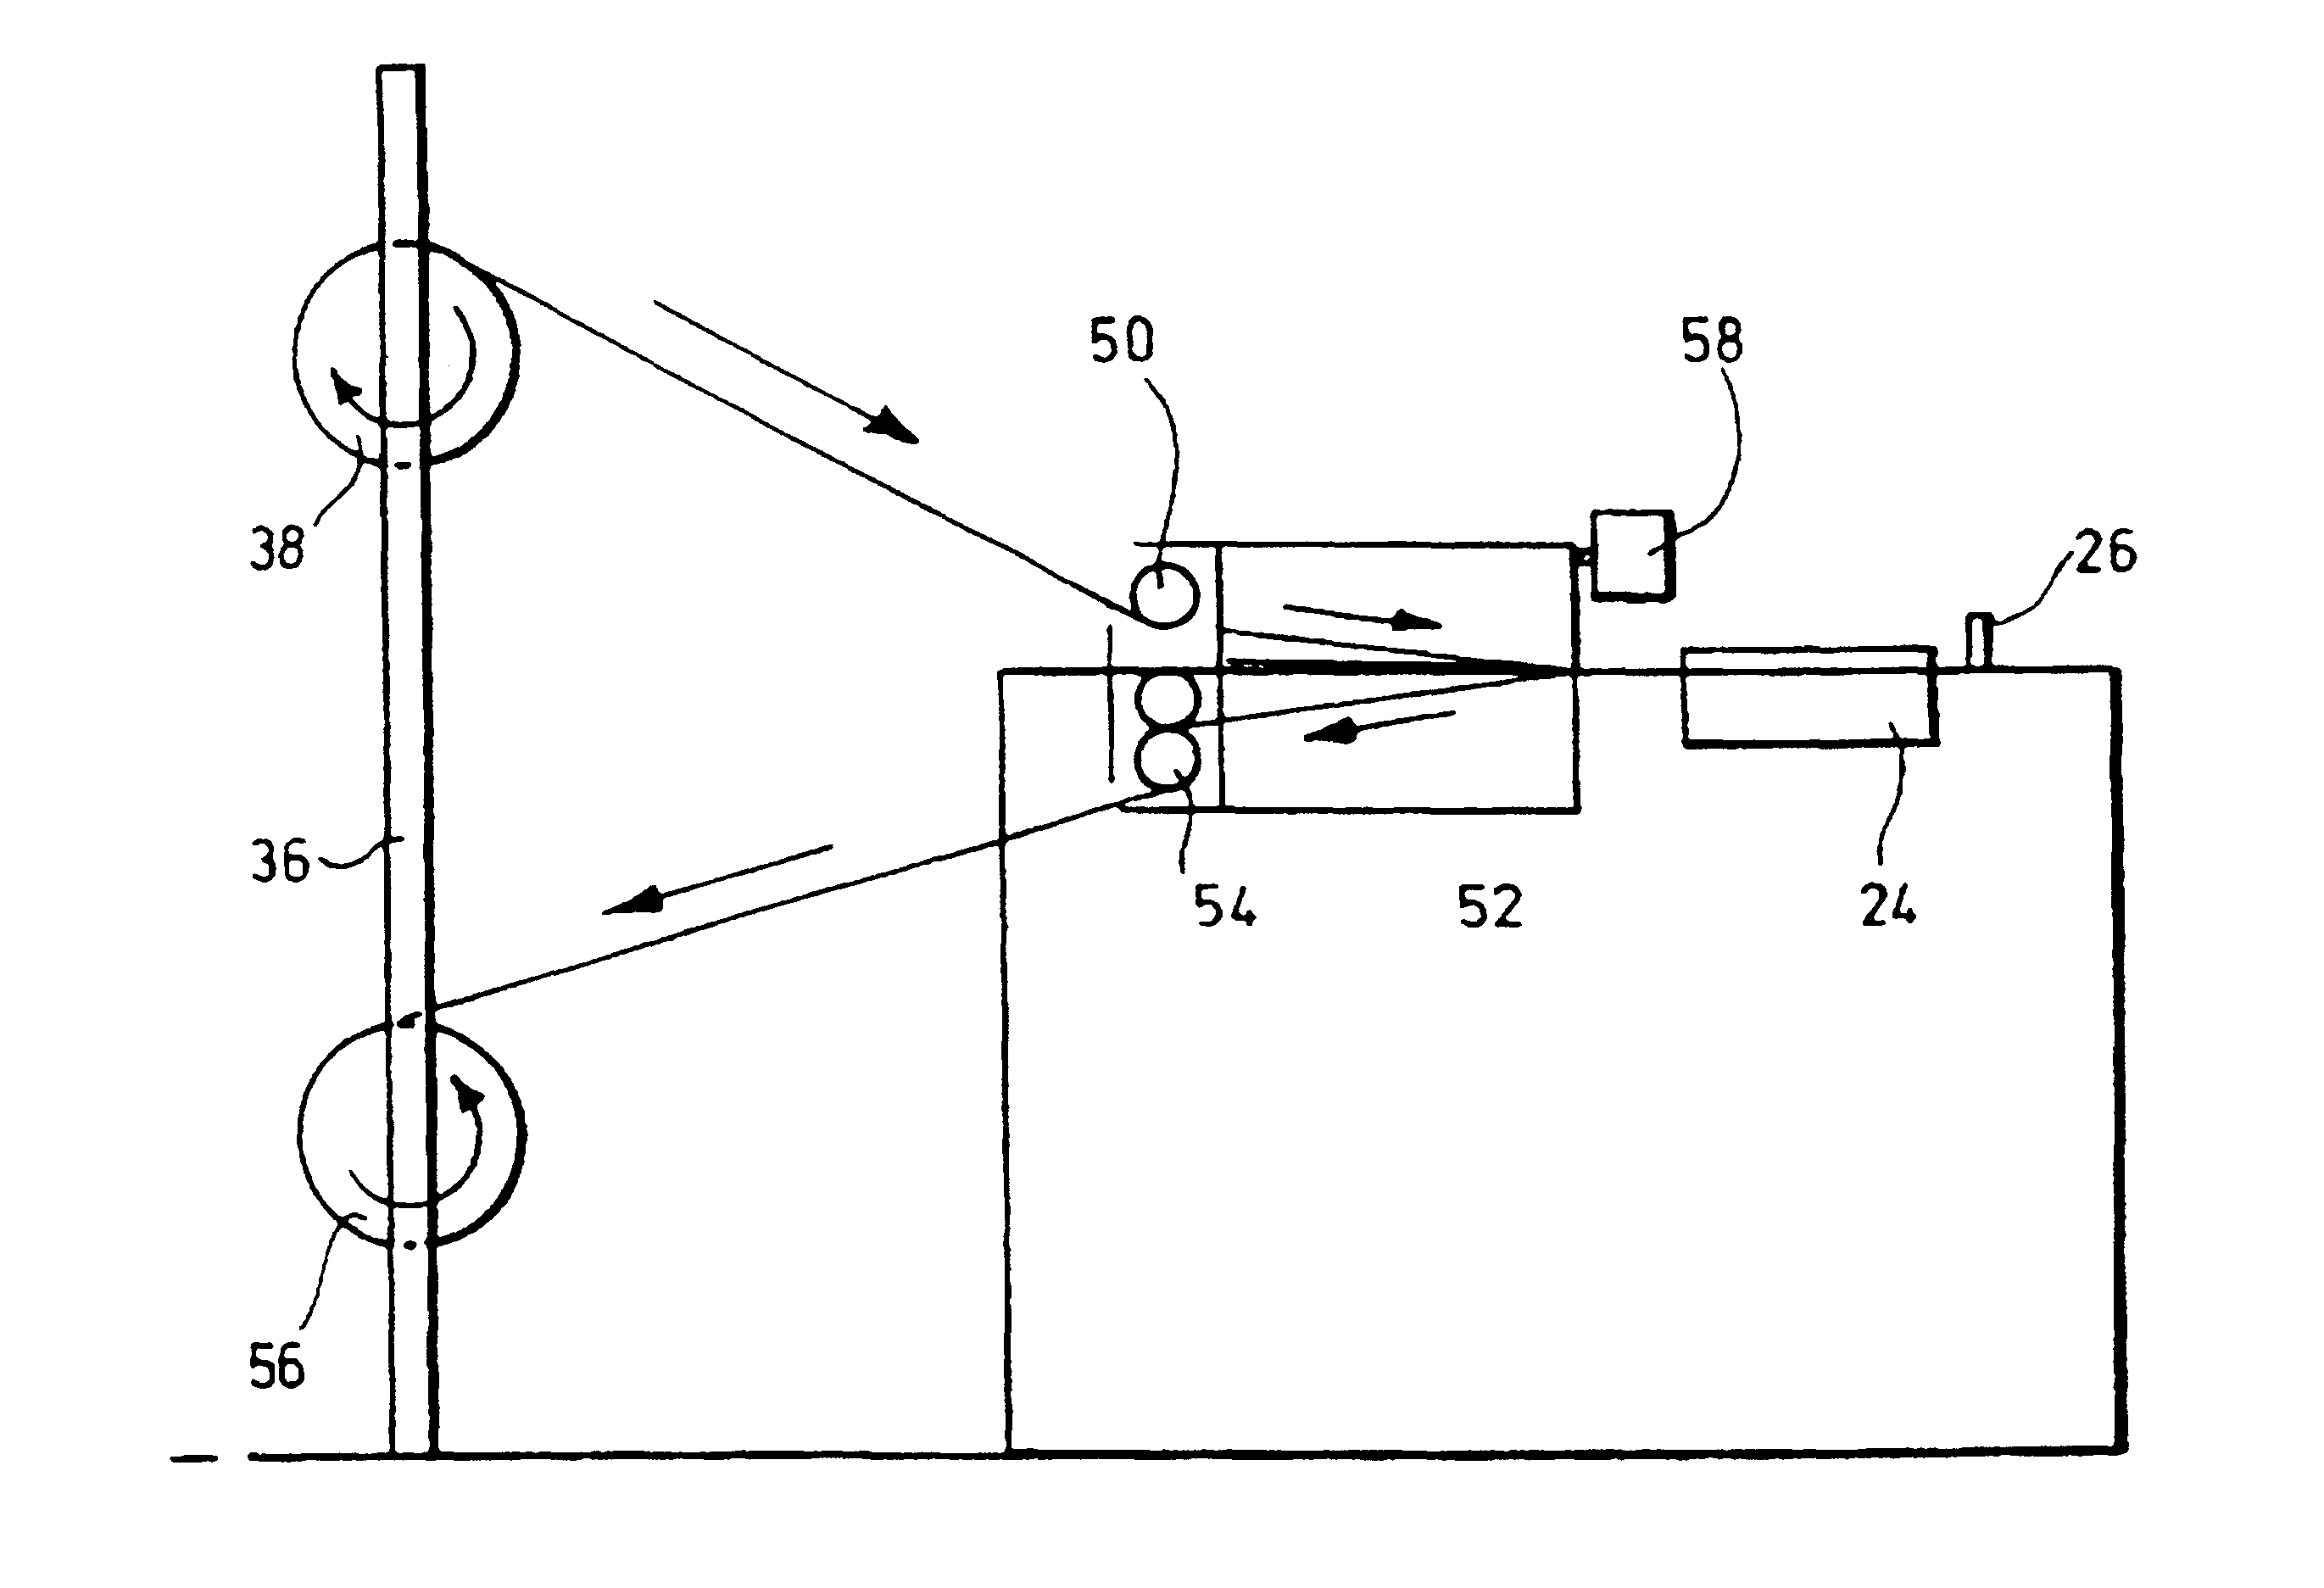 Apparatus for mounting a cutting strip